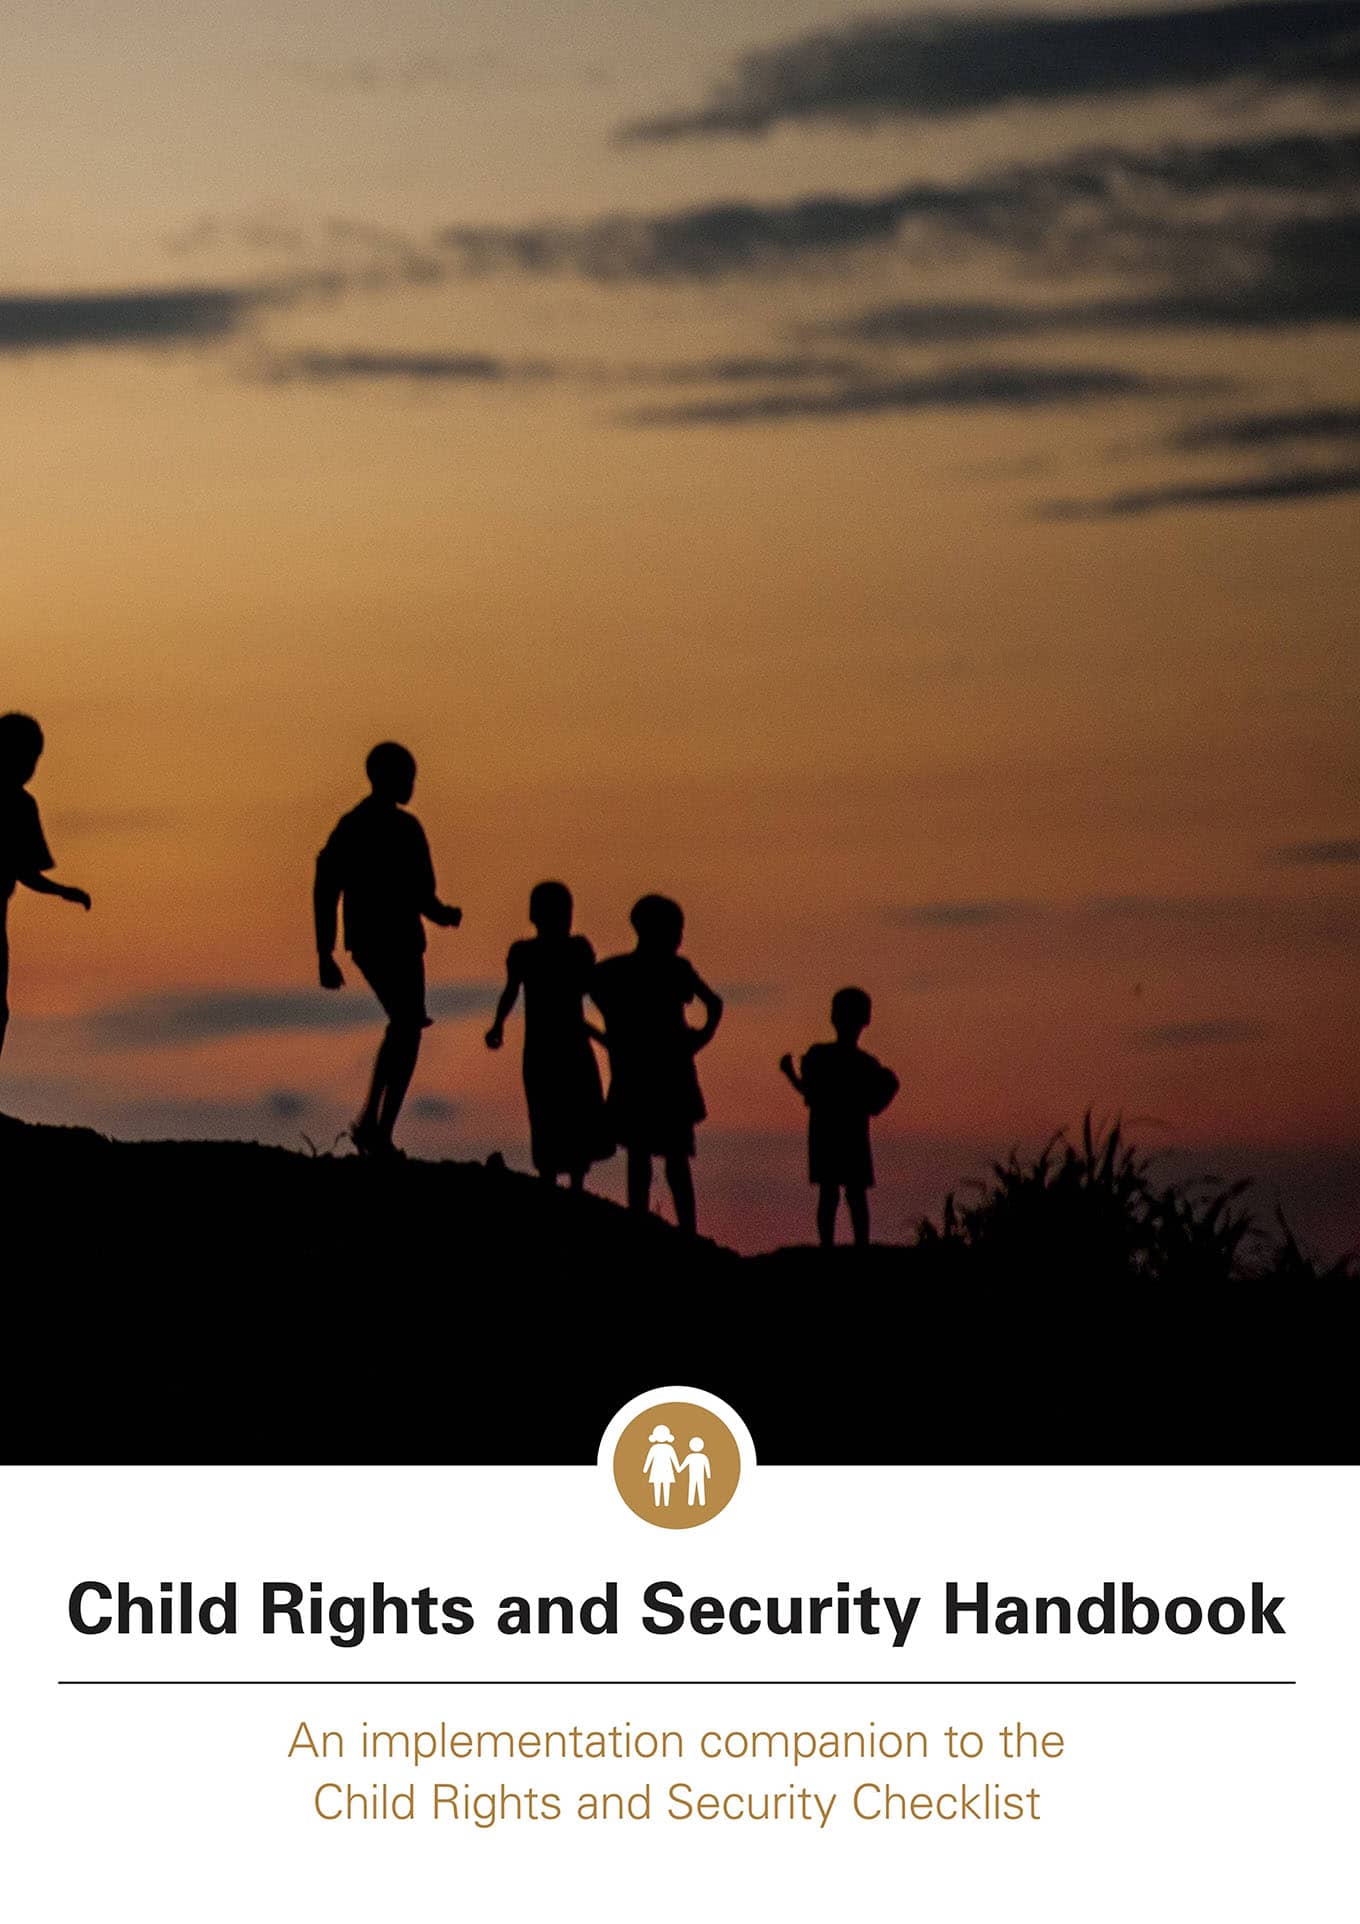 Child Rights and Security Handbook: An implementation companion to the Child Rights and Security Checklist (UNICEF, 2018)